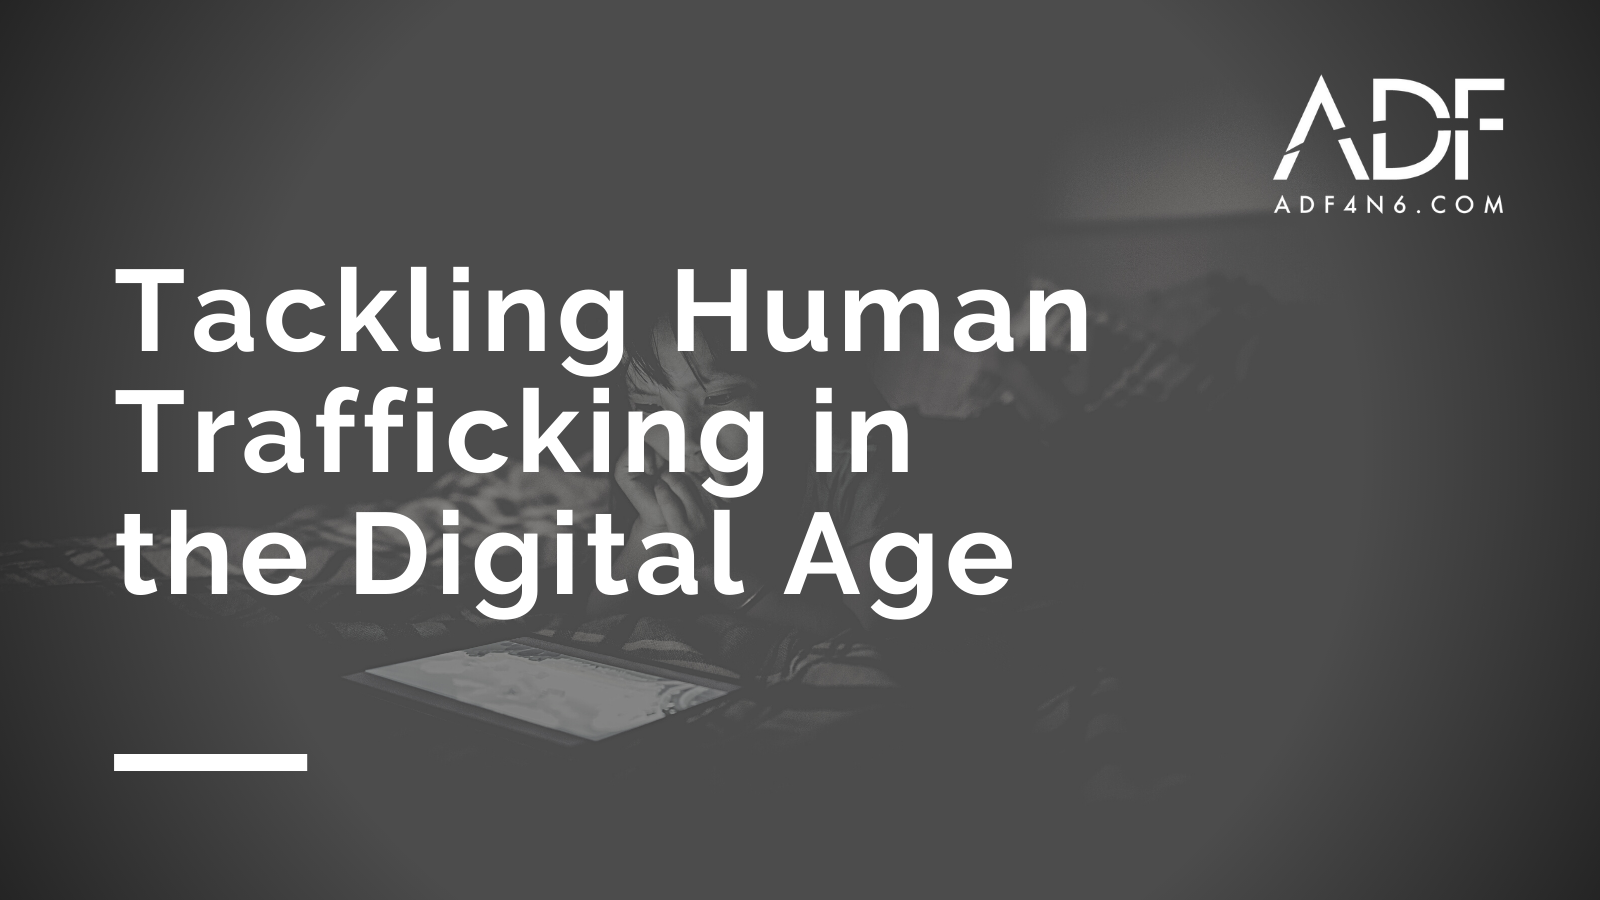 Tackling Human Trafficking in the Digital Age